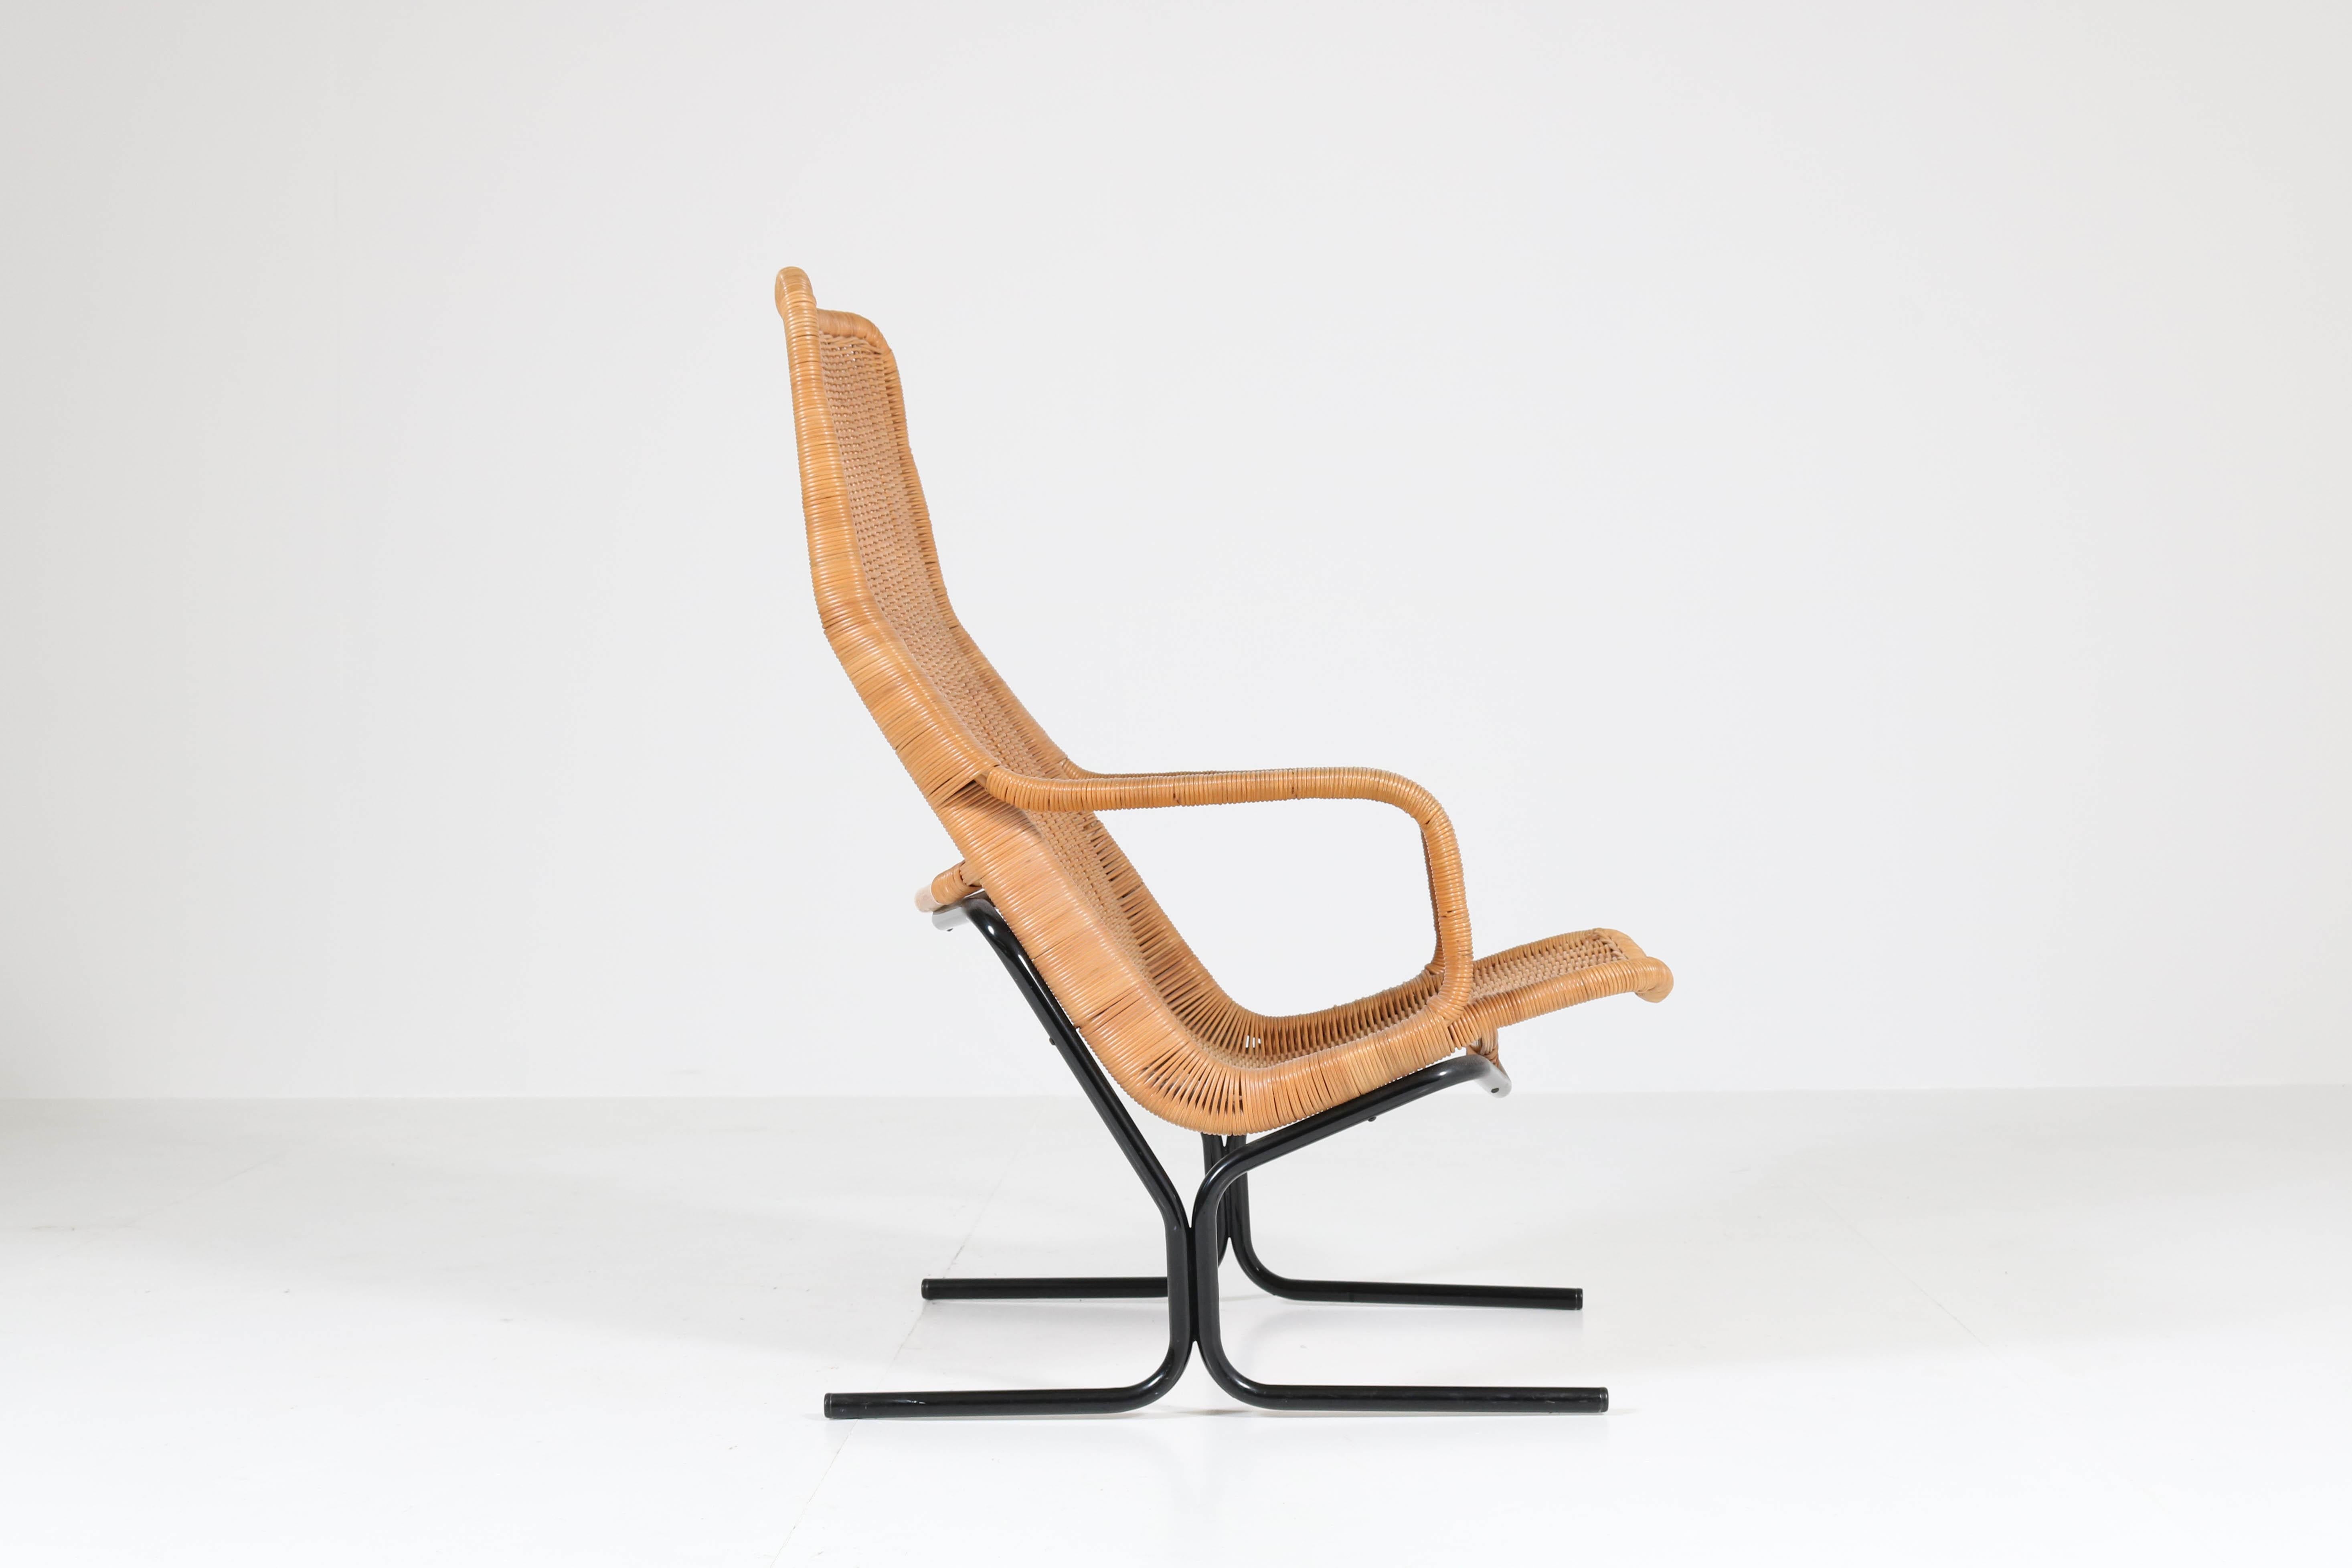 Elegant Mid-Century Modern lounge chair.
Design by Dirk van Sliedrecht for Rohé Noordwolde.
Striking Dutch design from the sixties.
Wicker seating with black lacquered metal base.
In good original condition with minor wear consistent with age